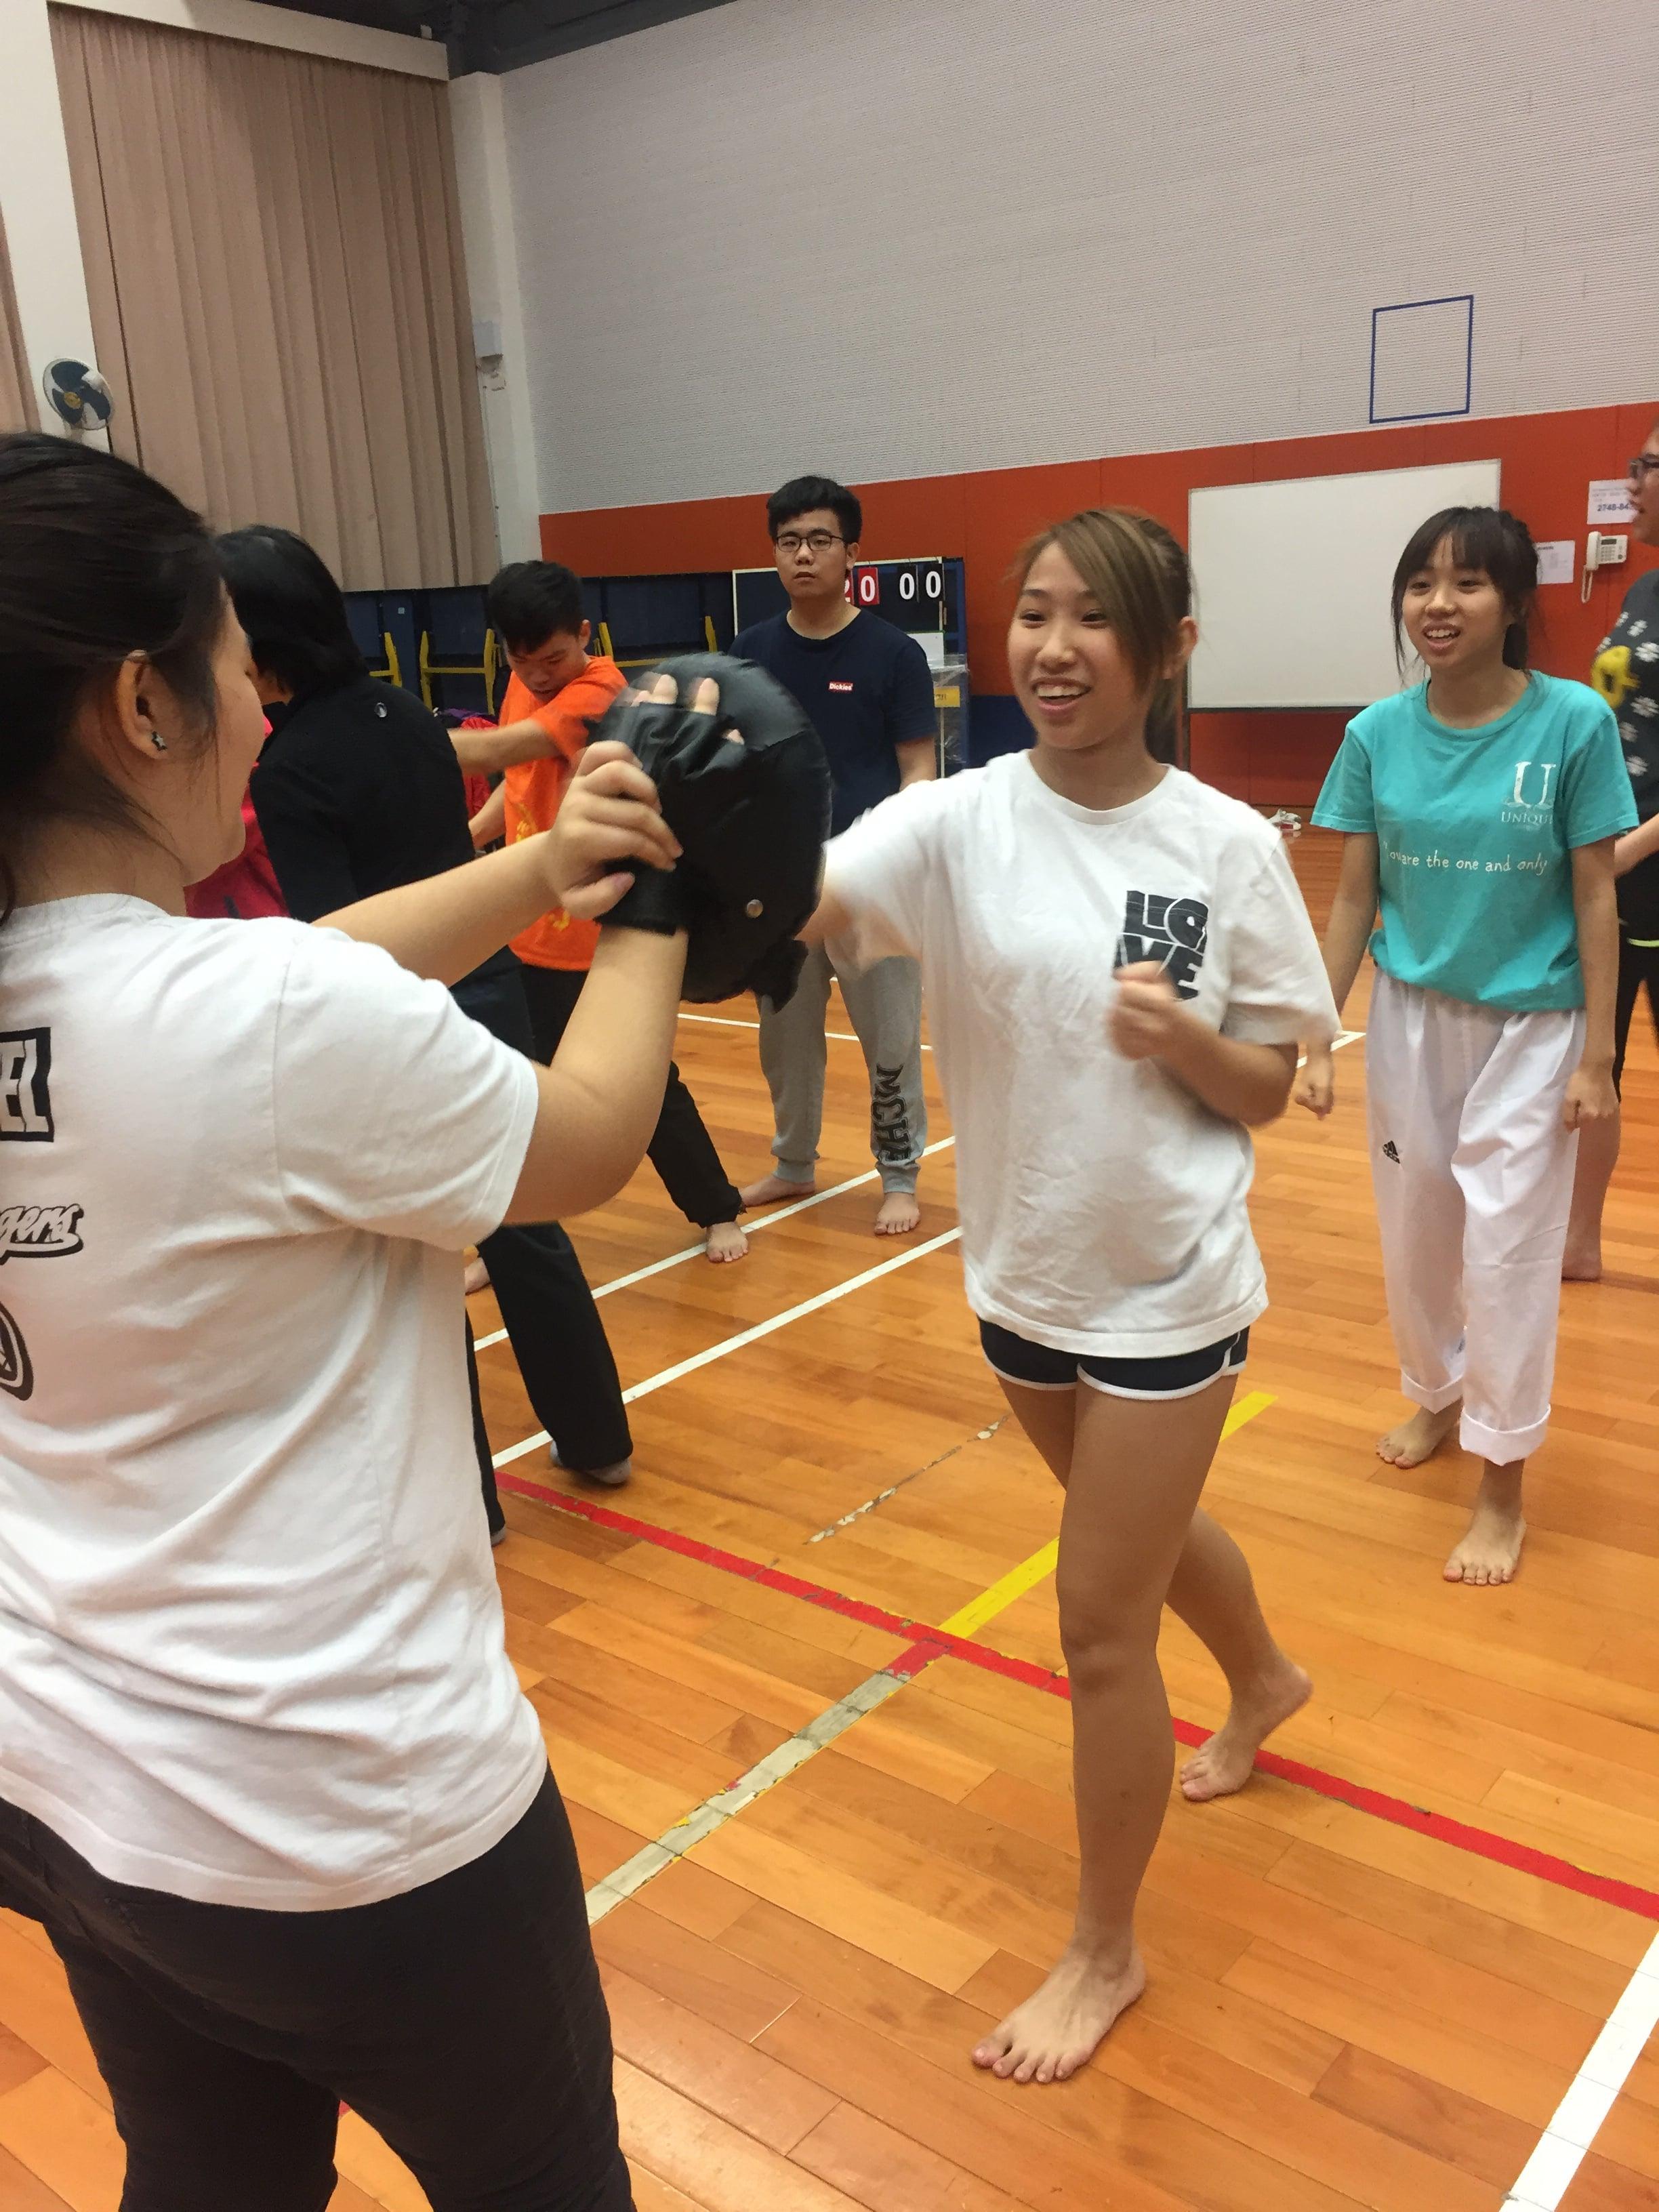 Students experienced basic techniques of karate and self-defense